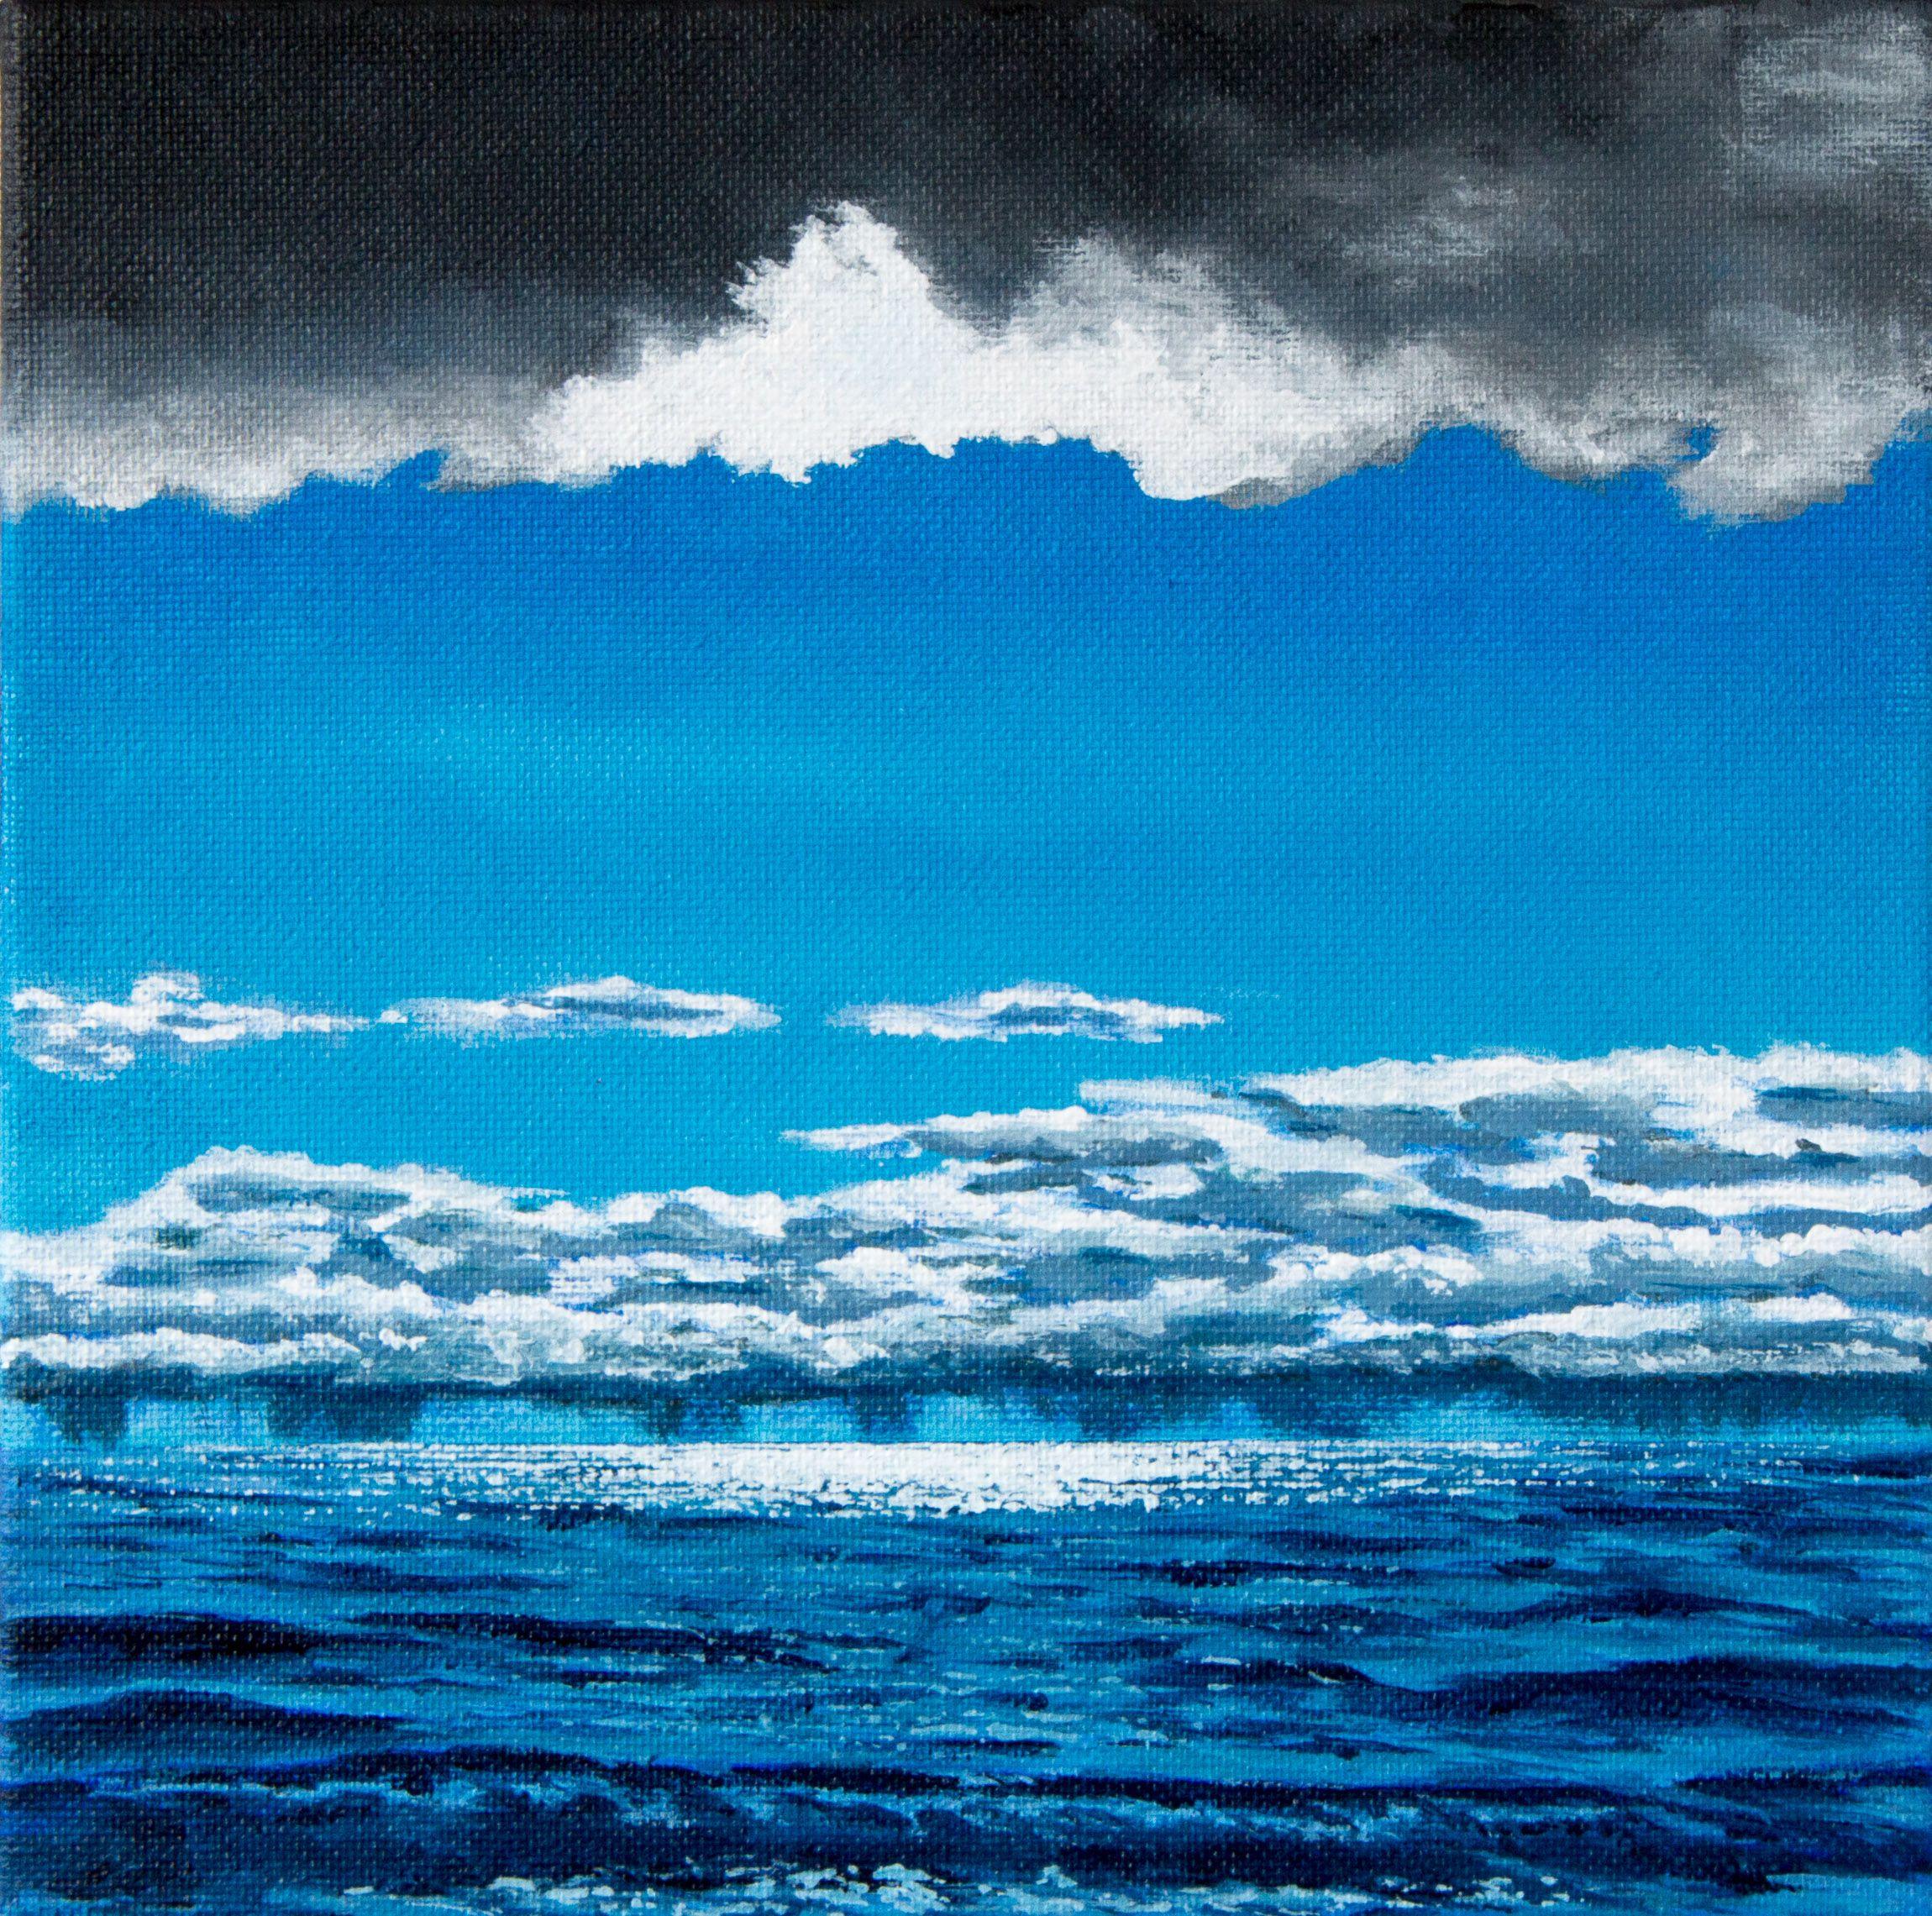 This a painting depicts the sea near where I live in north Wales after a summer storm began to clear and the sun began reappearing behind the clouds and the storm can be seen over the distant horizon.  Painted on all four side edges in black and